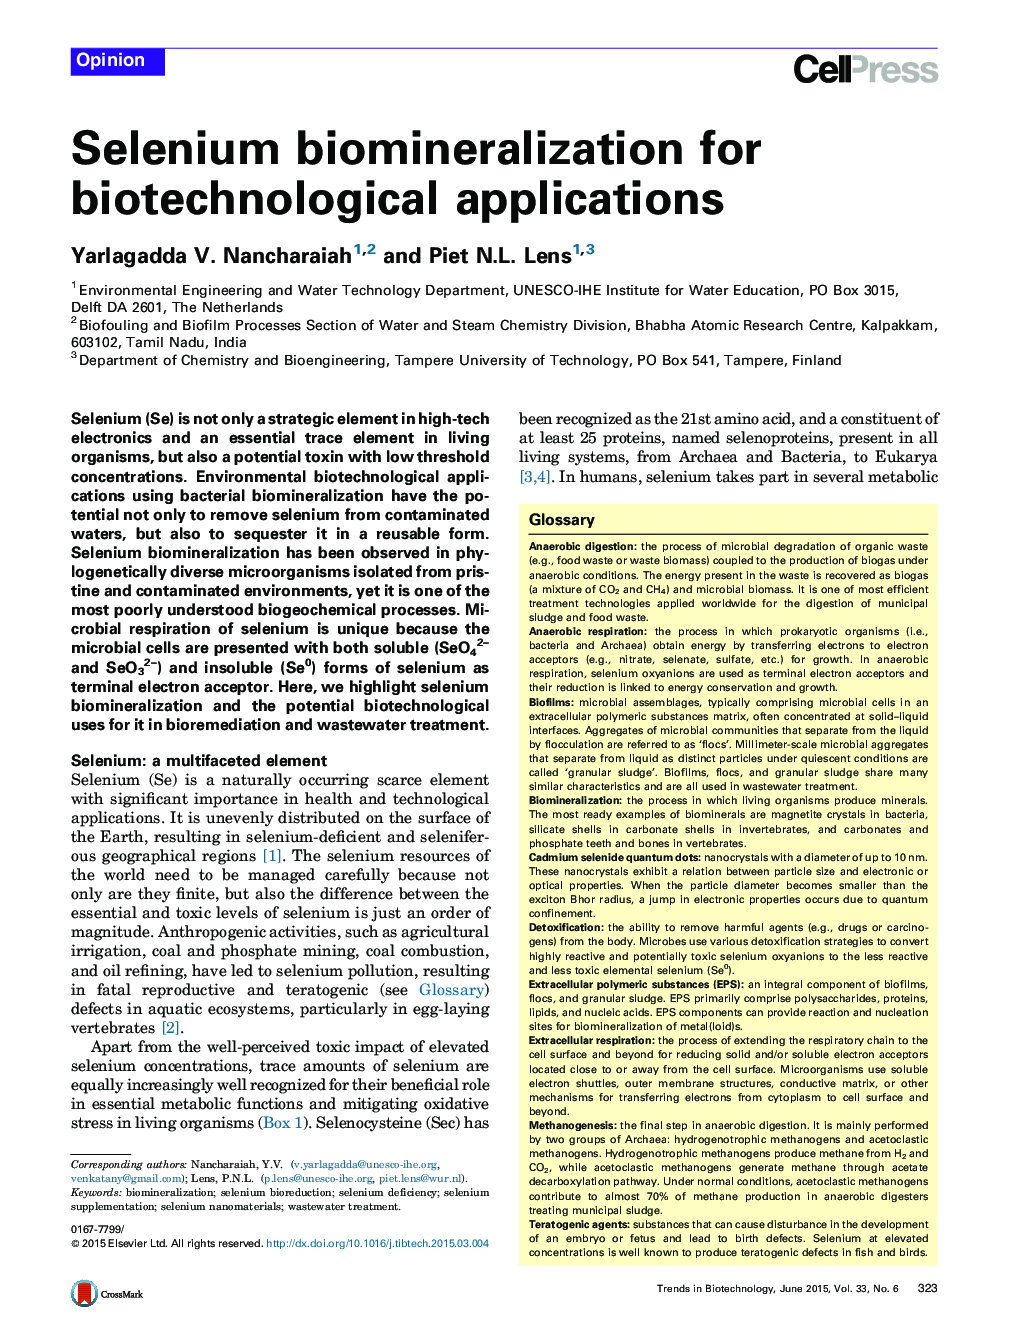 Selenium biomineralization for biotechnological applications